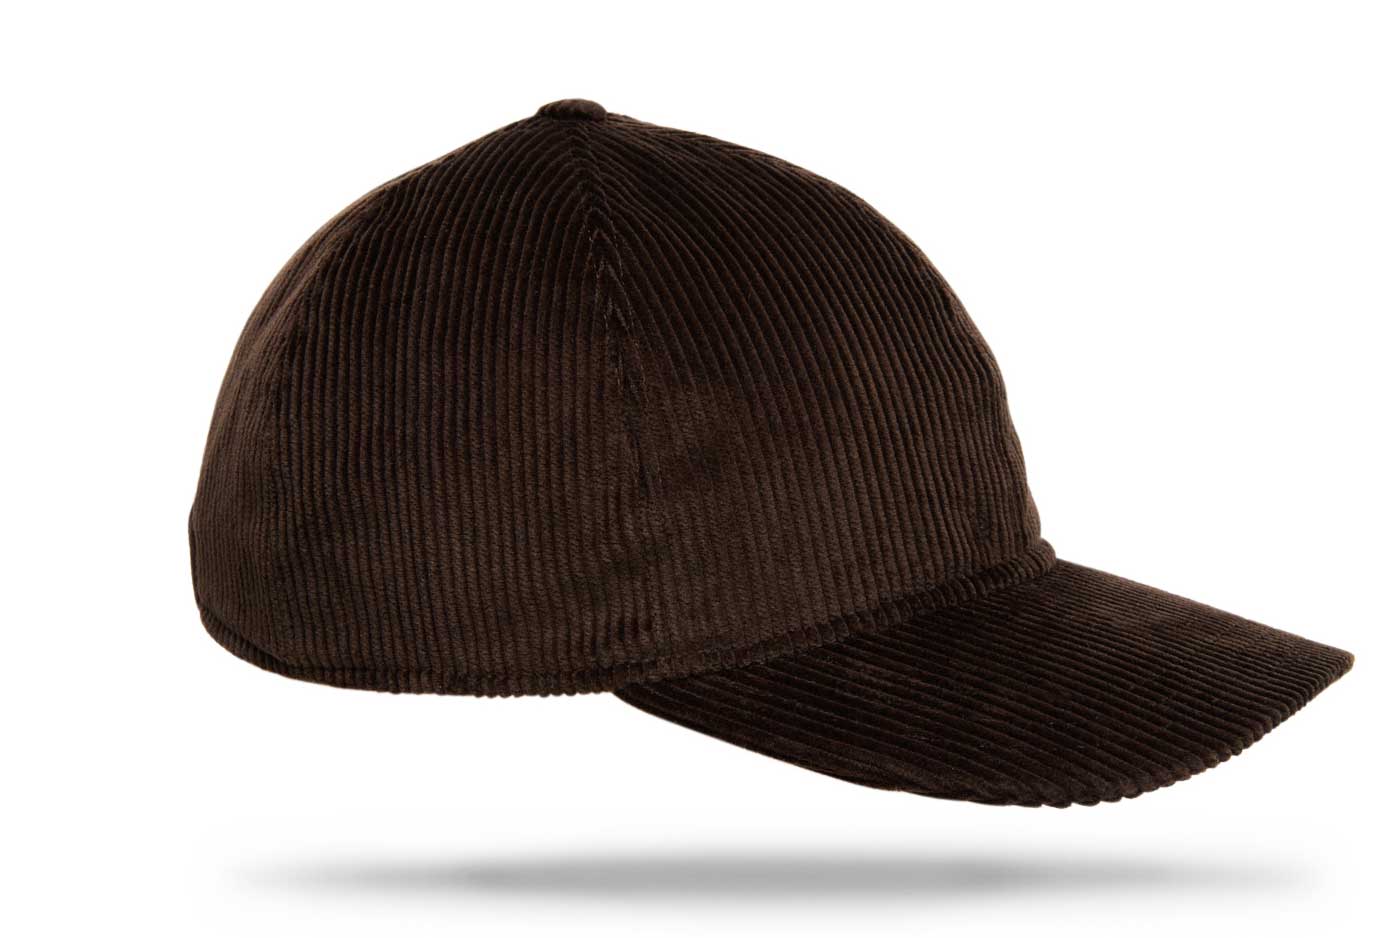 
Design
A refined and upgraded version of a timeless baseball cap for a modernized sportswear aesthetic. Crafted from 100% cotton, this elevated yet casual luxurious brown corduroy cap is constructed from six panels with a curved brim. The perfect casual-luxe accessory for any ensemble. 
Material
100% Cotton . 
Specifications
100% cotton corduroy fully lined.Handmade in Italy for Worth & Worth.